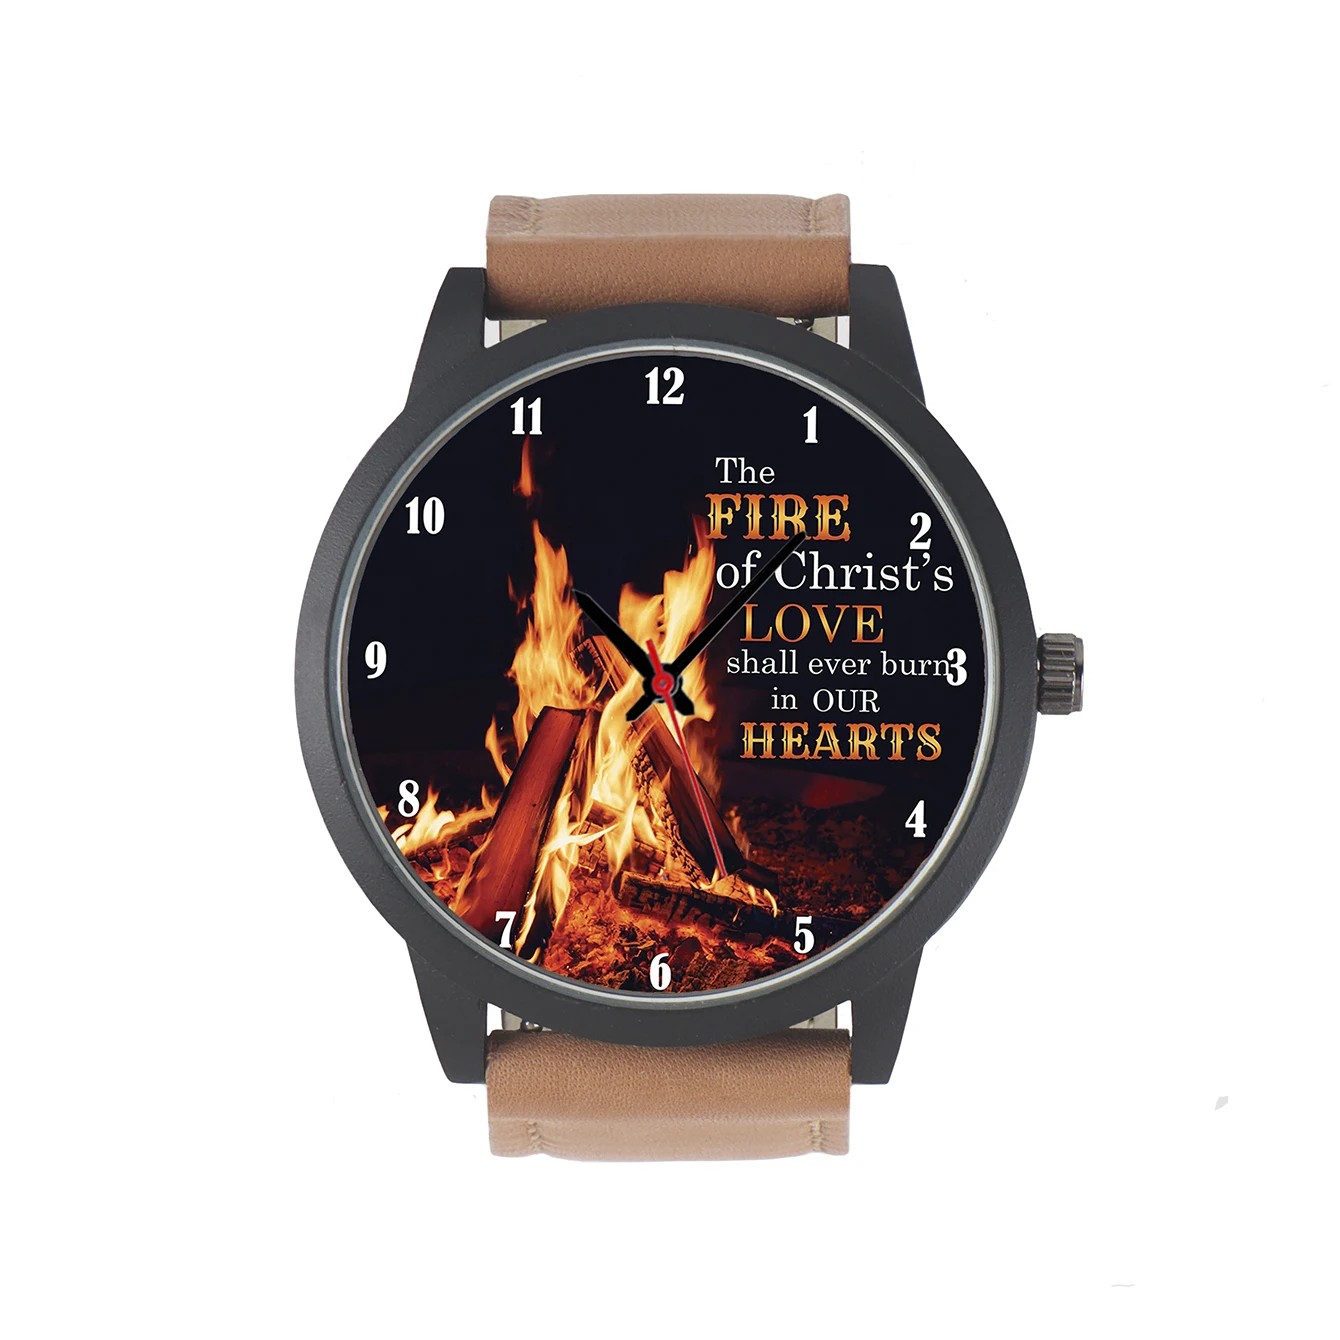 Free Shipping Factory Store Fire Design Christ's Love Gifts For followers of Christianity Men's Battery Quartz Wrist Watch high quality racing gloves manufacture best design cut fire resistance kart racing fireproof gloves all sizing